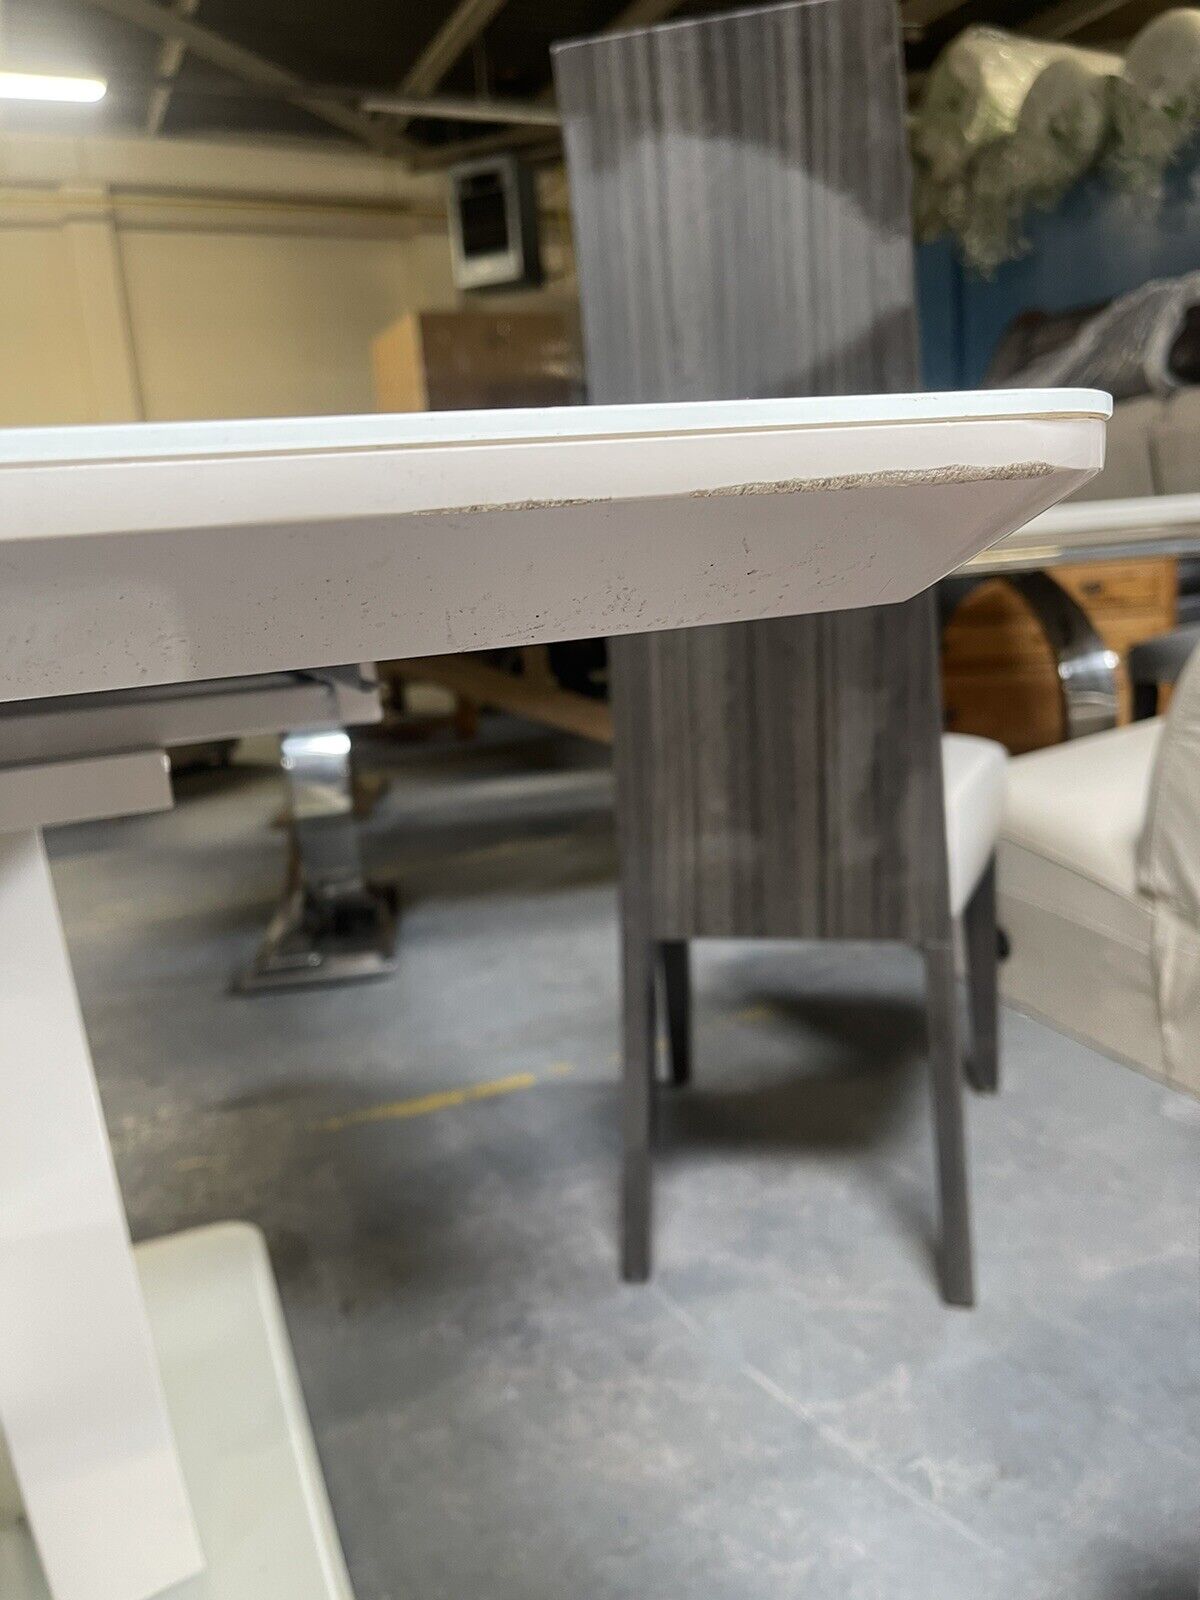 Arighi Bianchi Aragon Small Extending Dining Table RRP £775